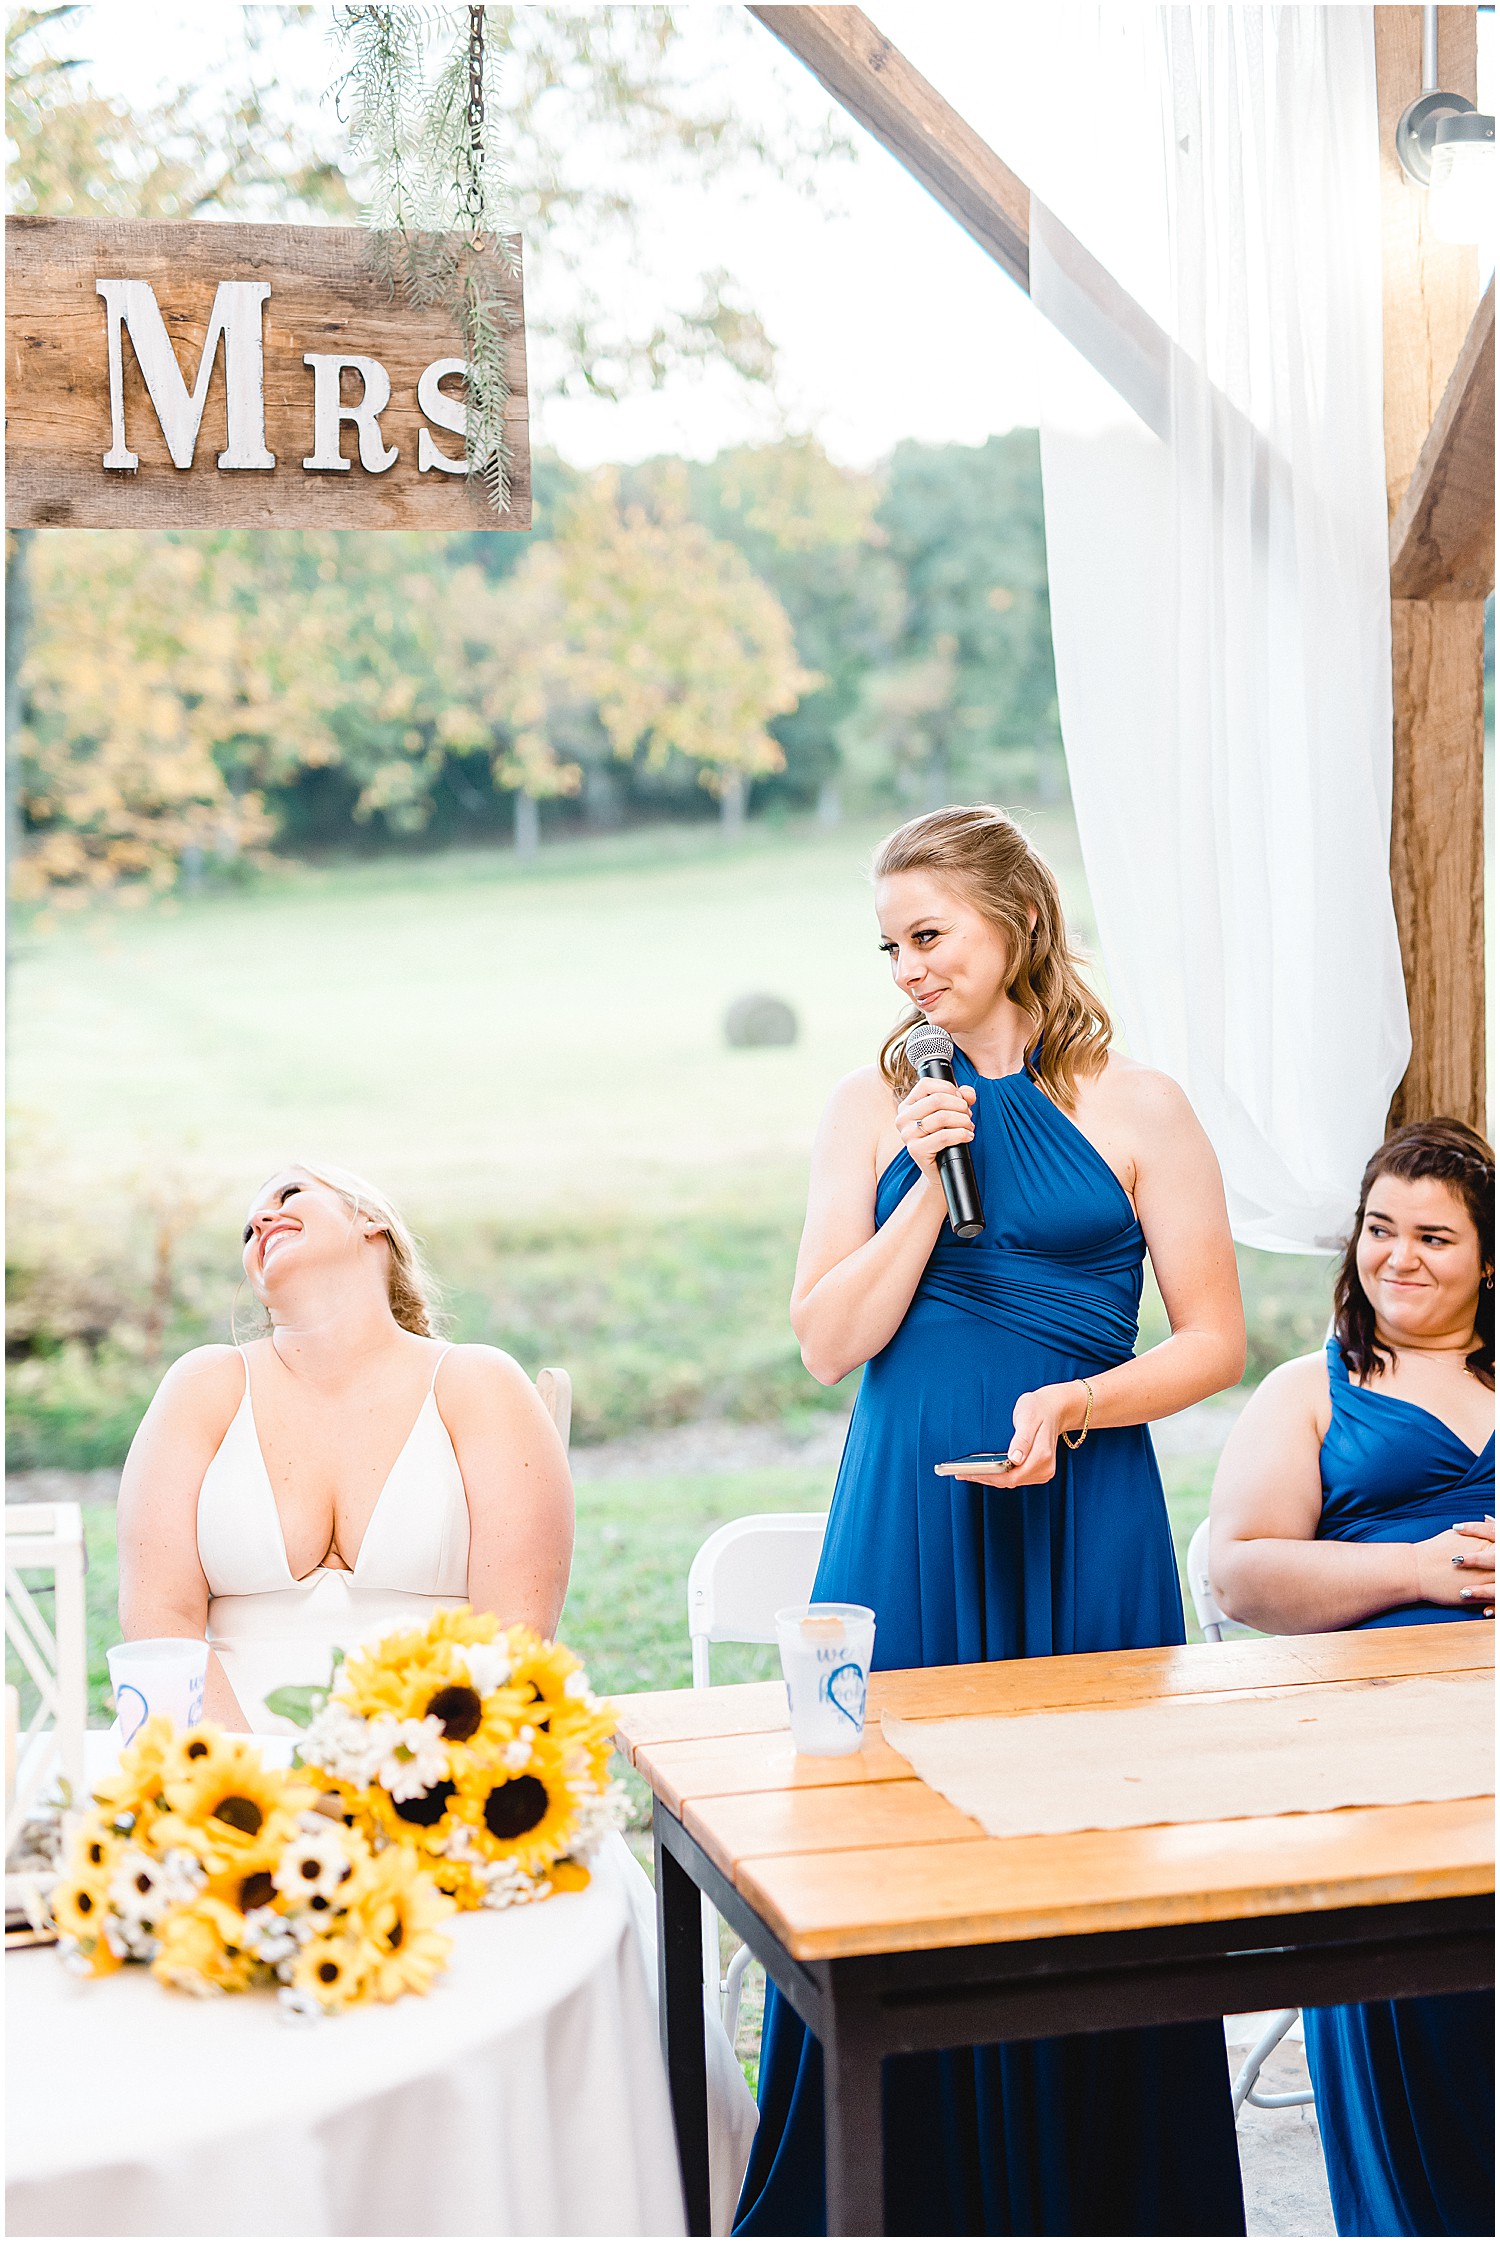 bride and maid of honor laugh during speeches at wedding reception at kempker's back 40